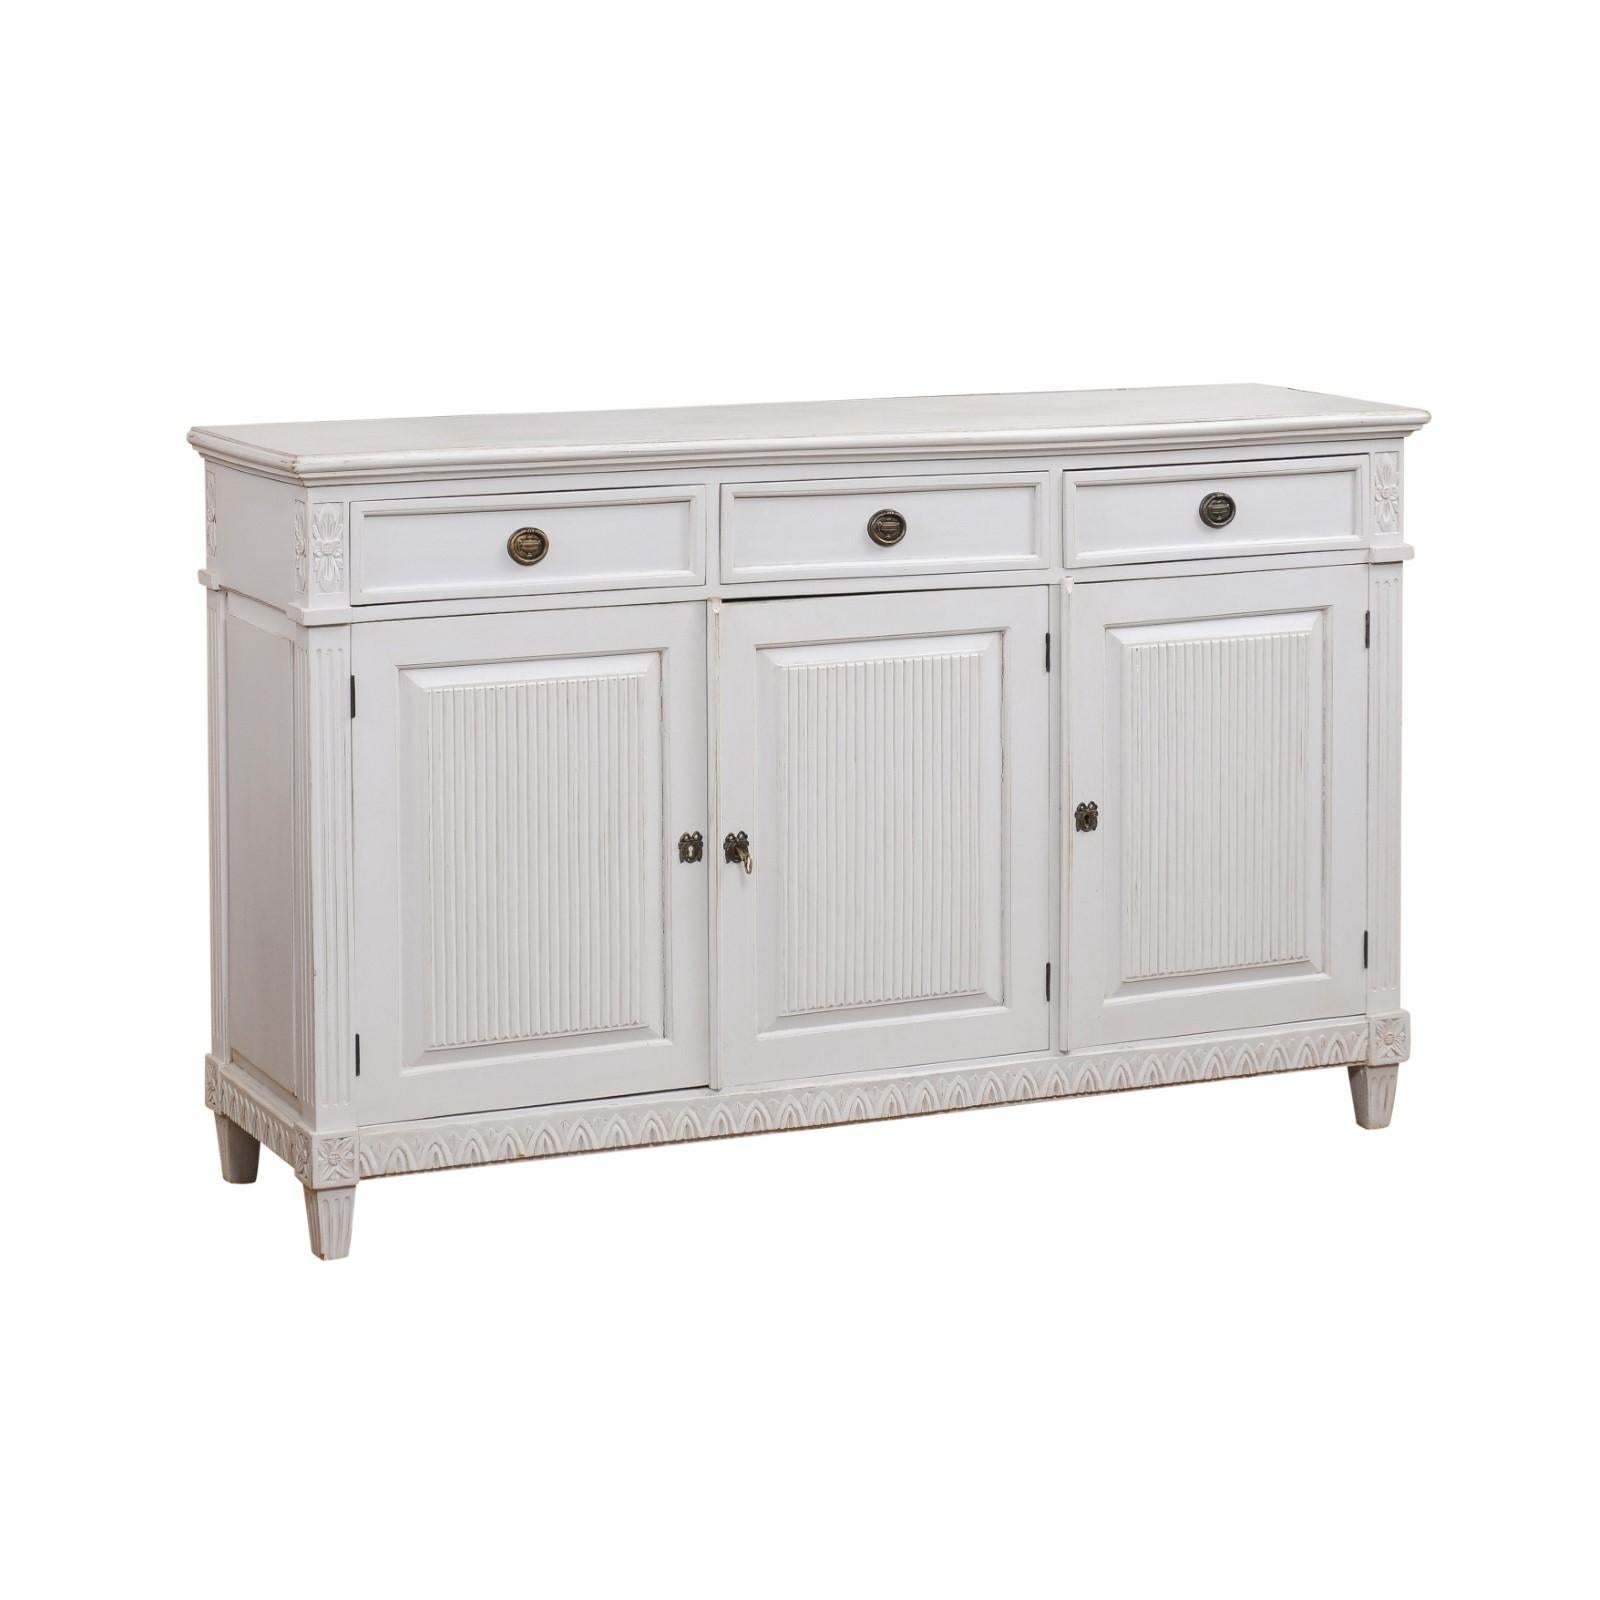 Swedish 1900s Gustavian Style Painted Sideboard with Three Drawers over Doors For Sale 7